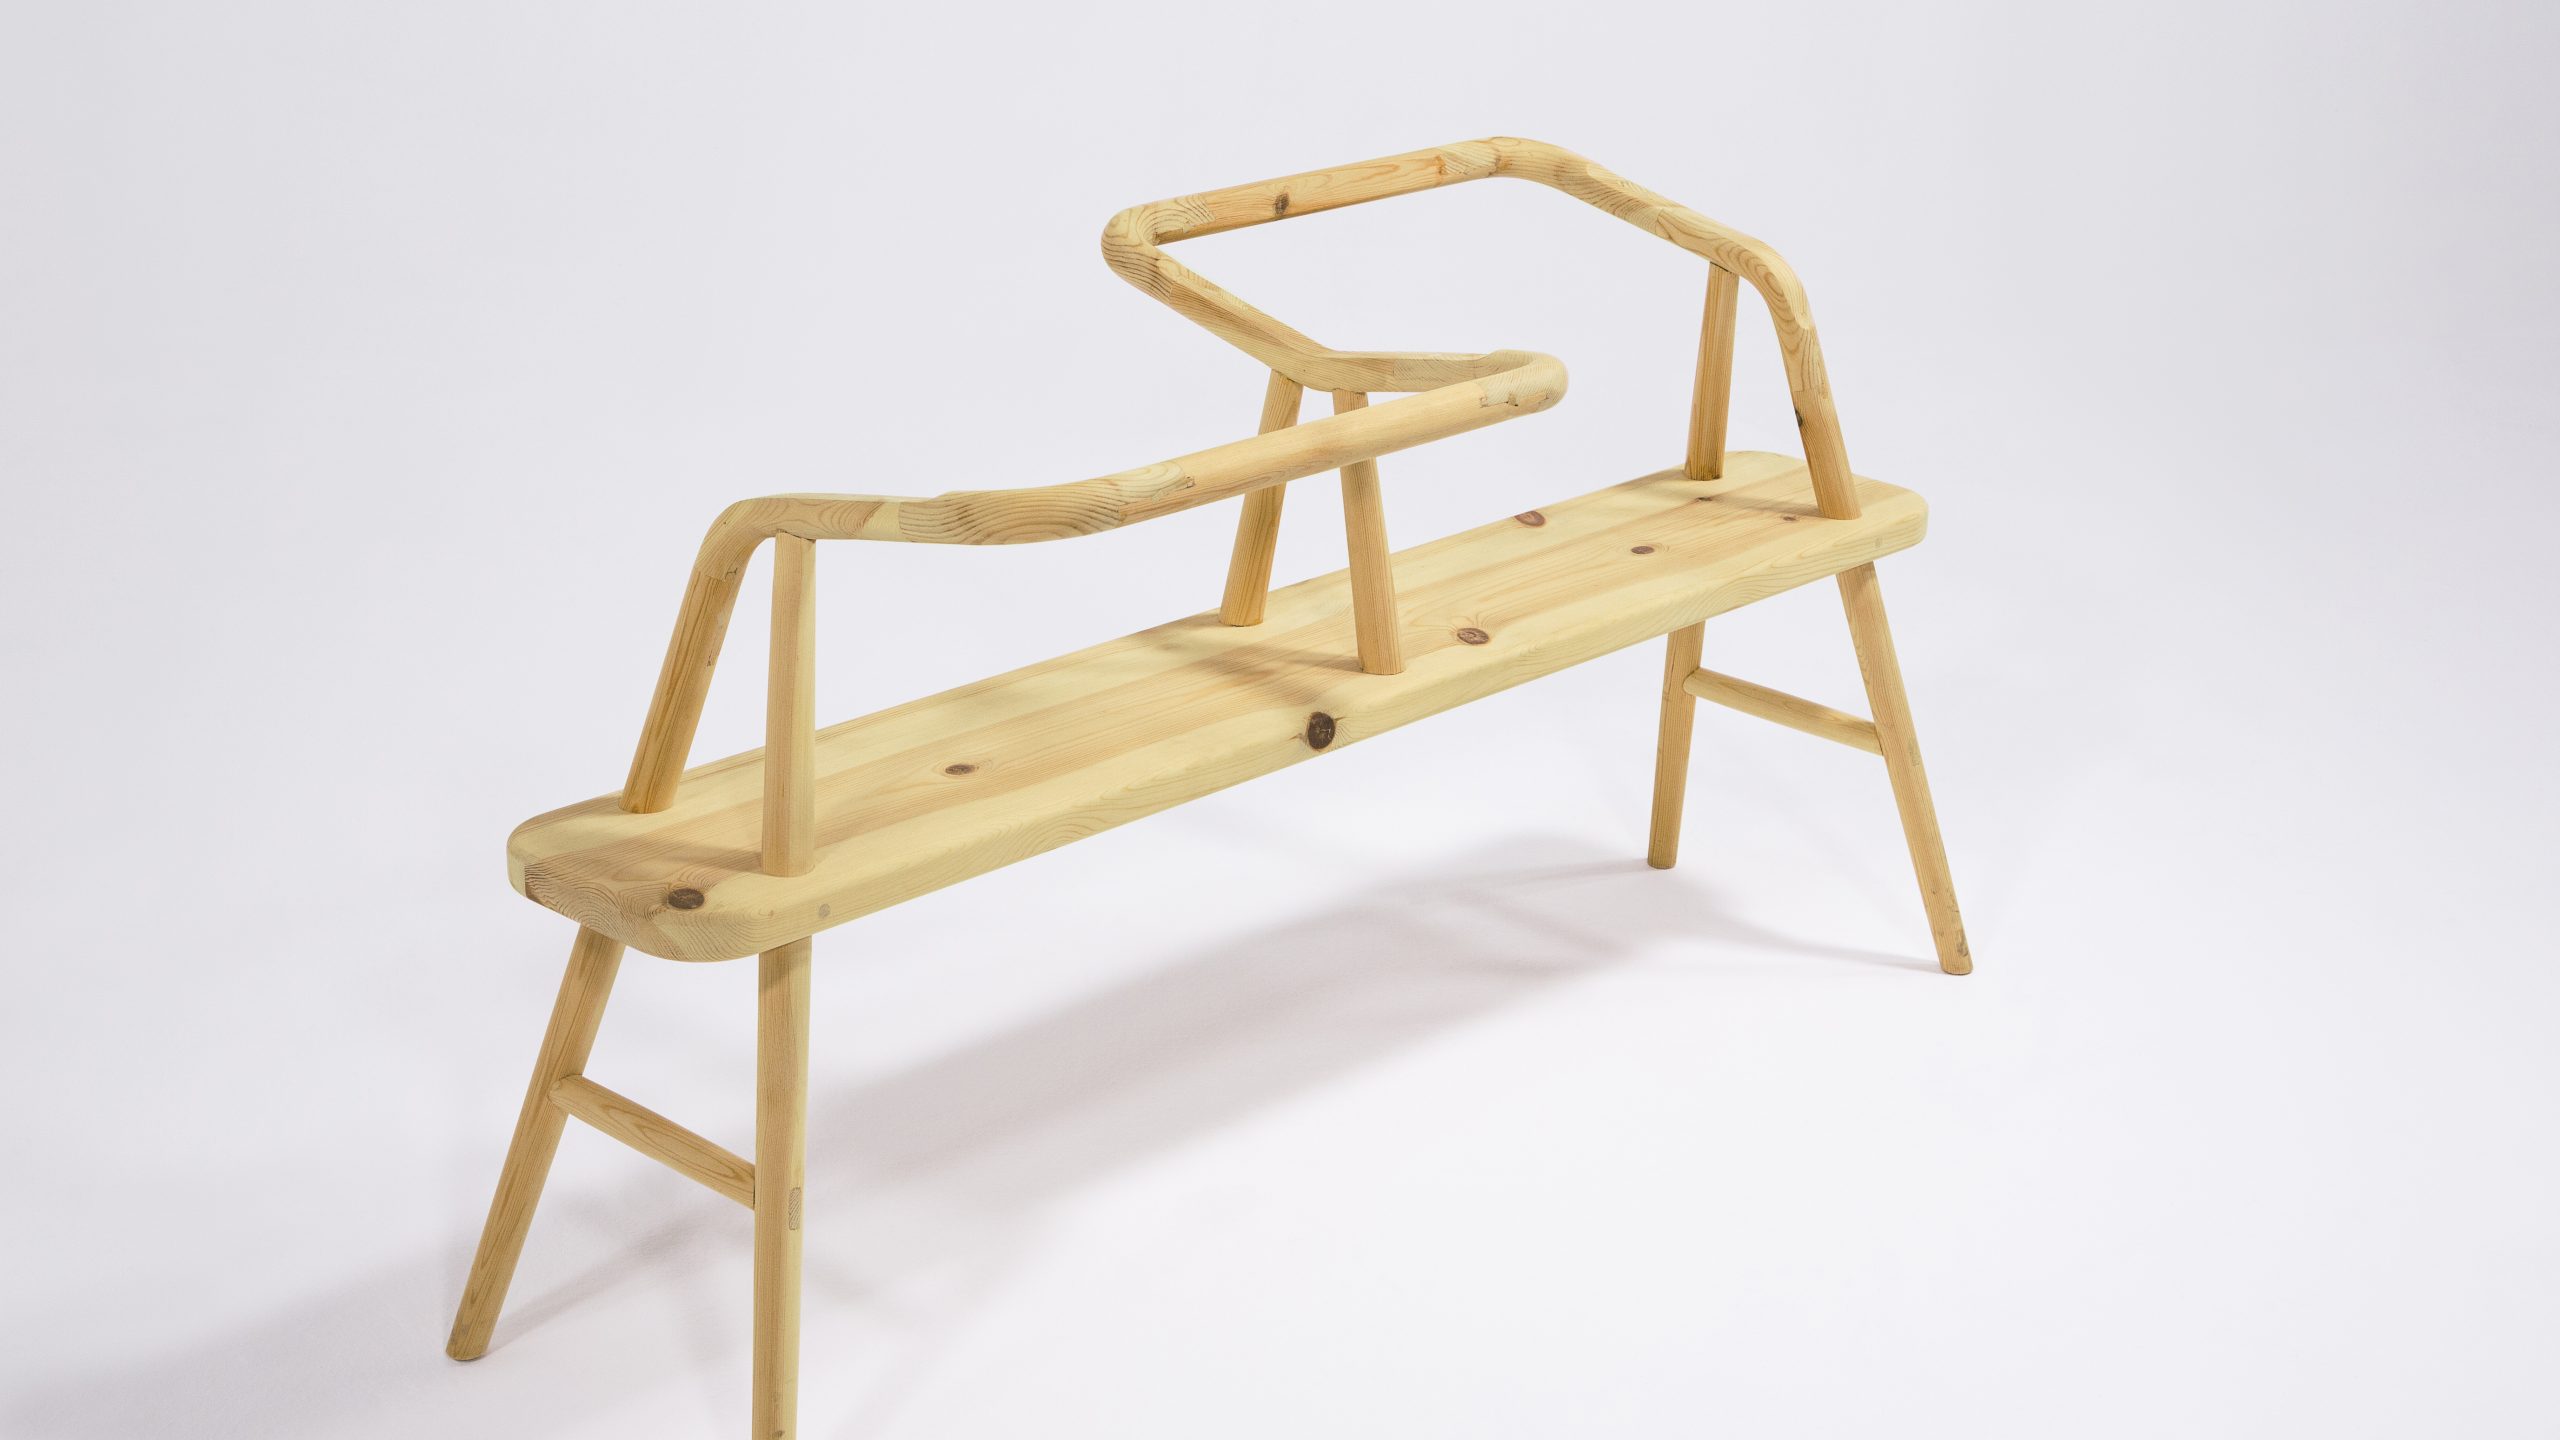 Designer bench with a touch of Chinese carpenter tradition - studio product photo in China - photo by photographer Tuomas Harjumaaskola, China